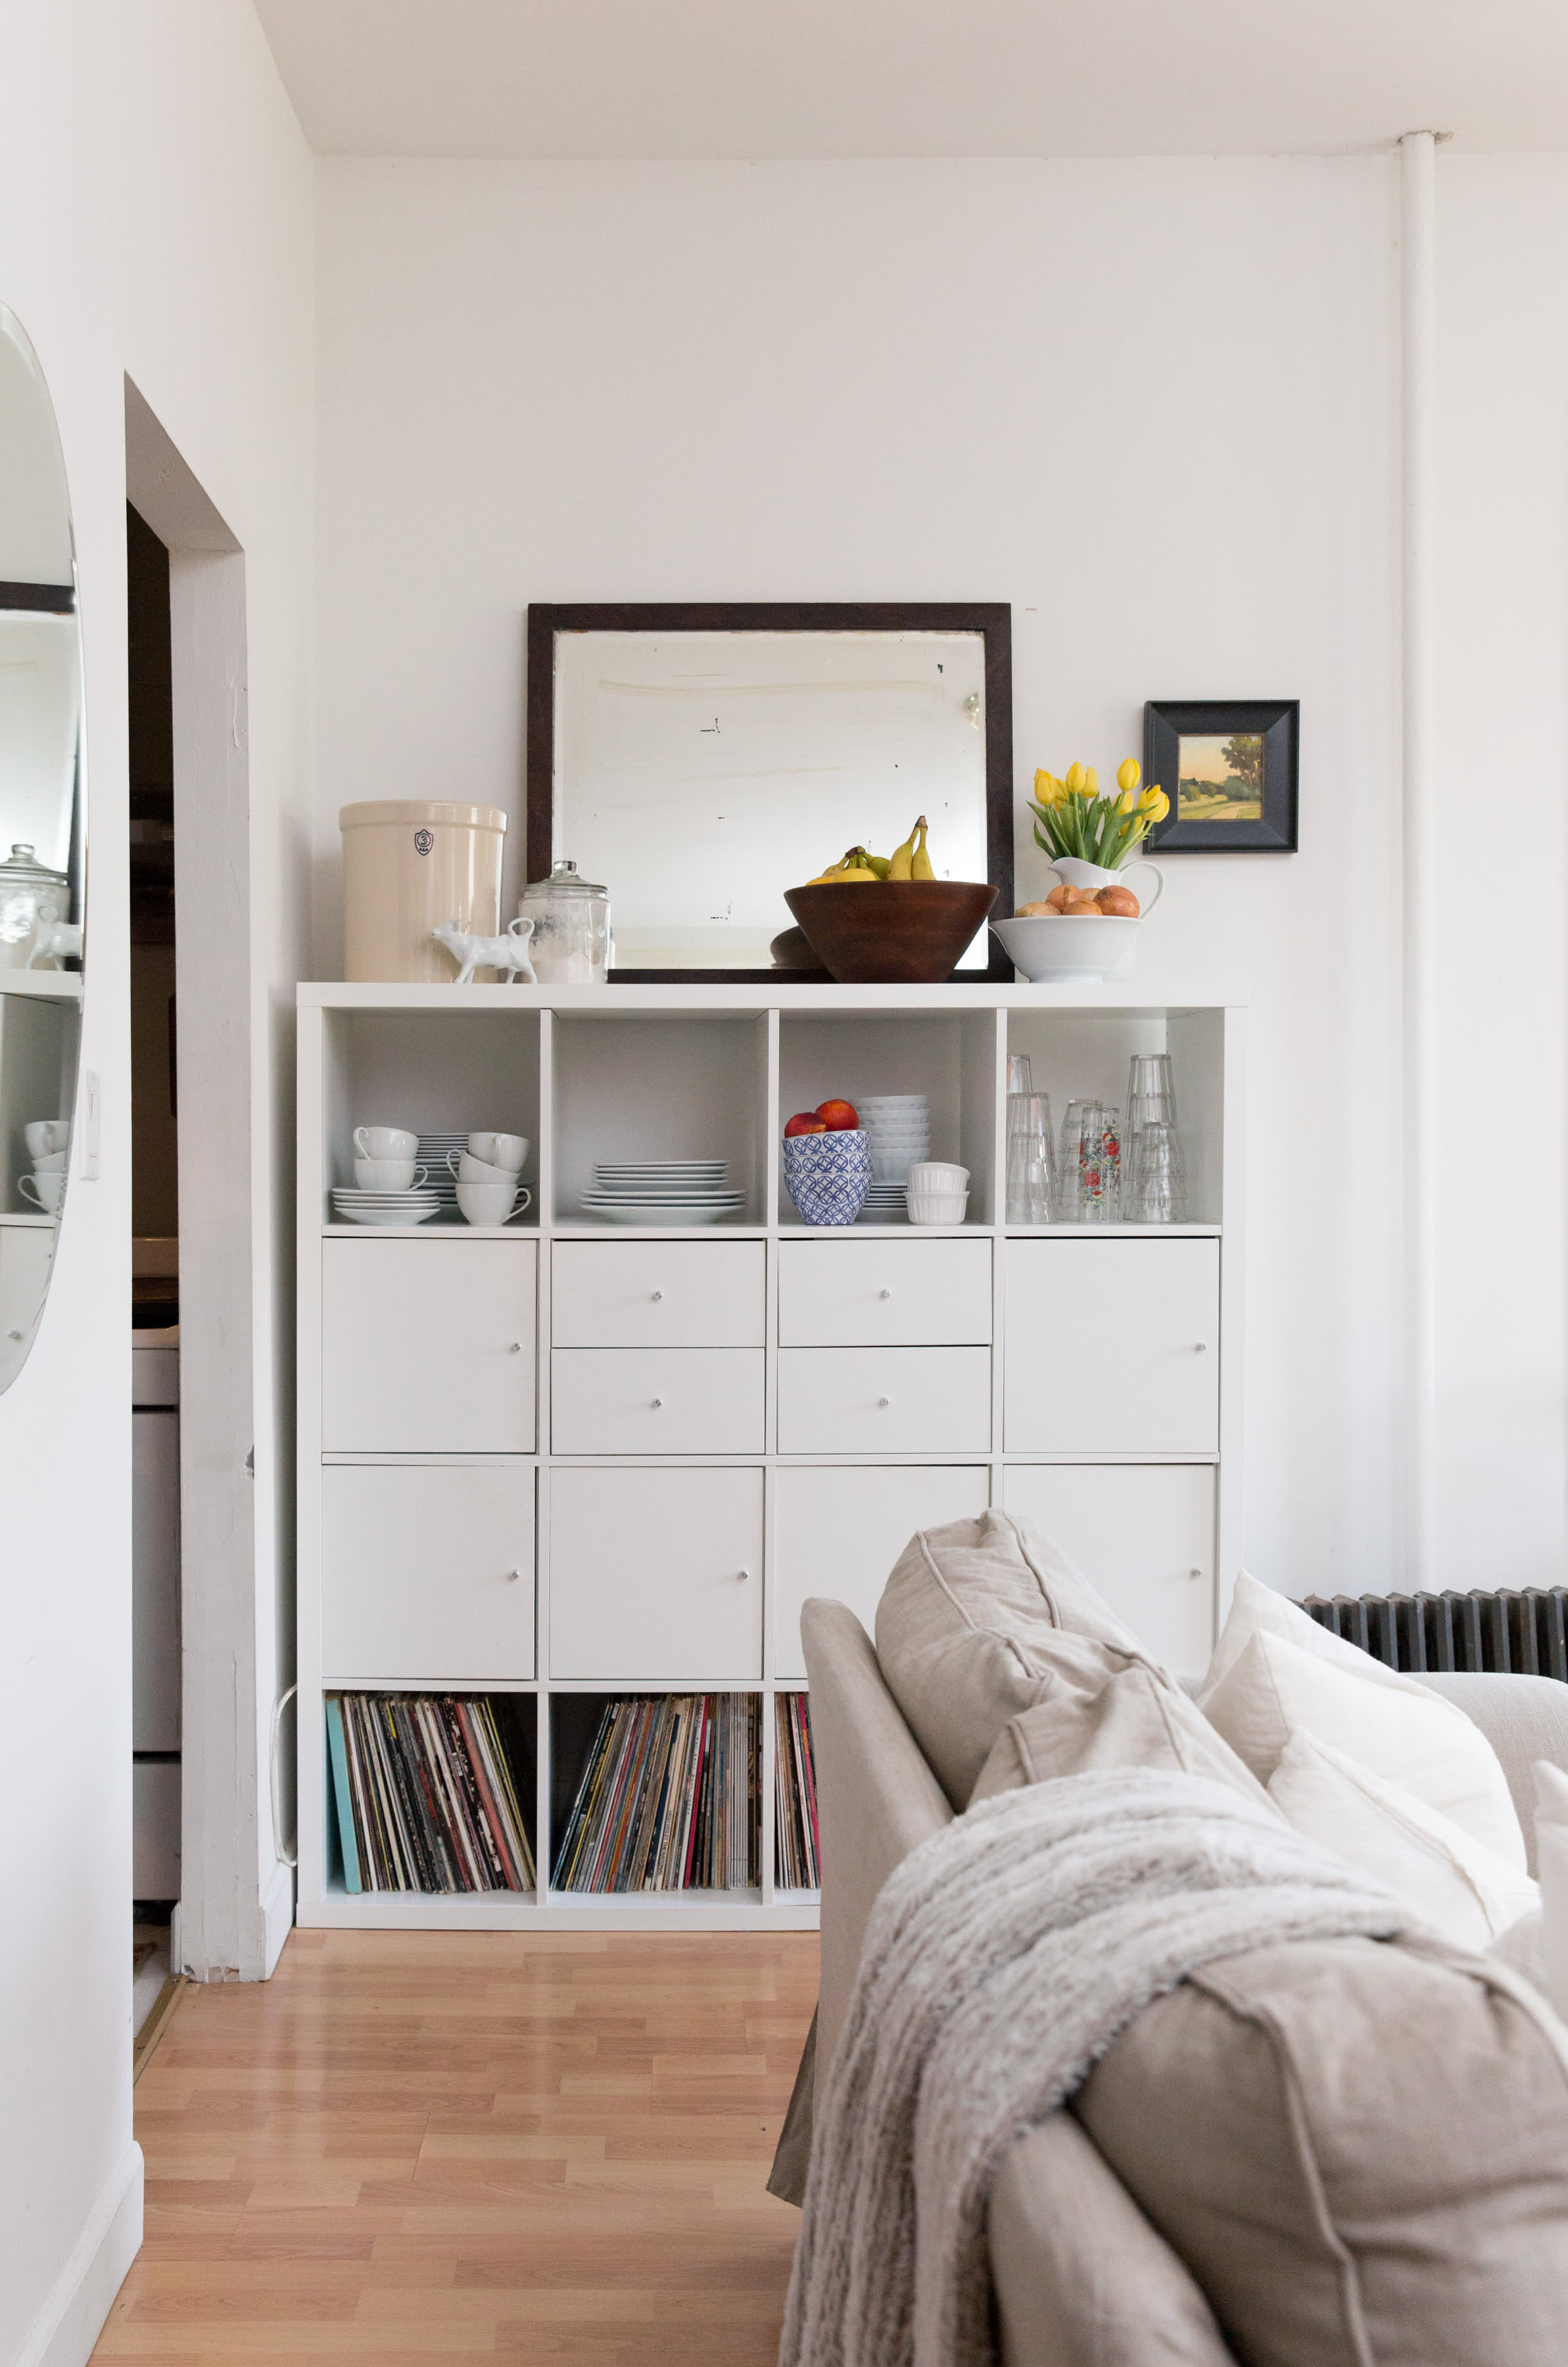 10 Small Space Shelving Solutions That Maximize Your Storage